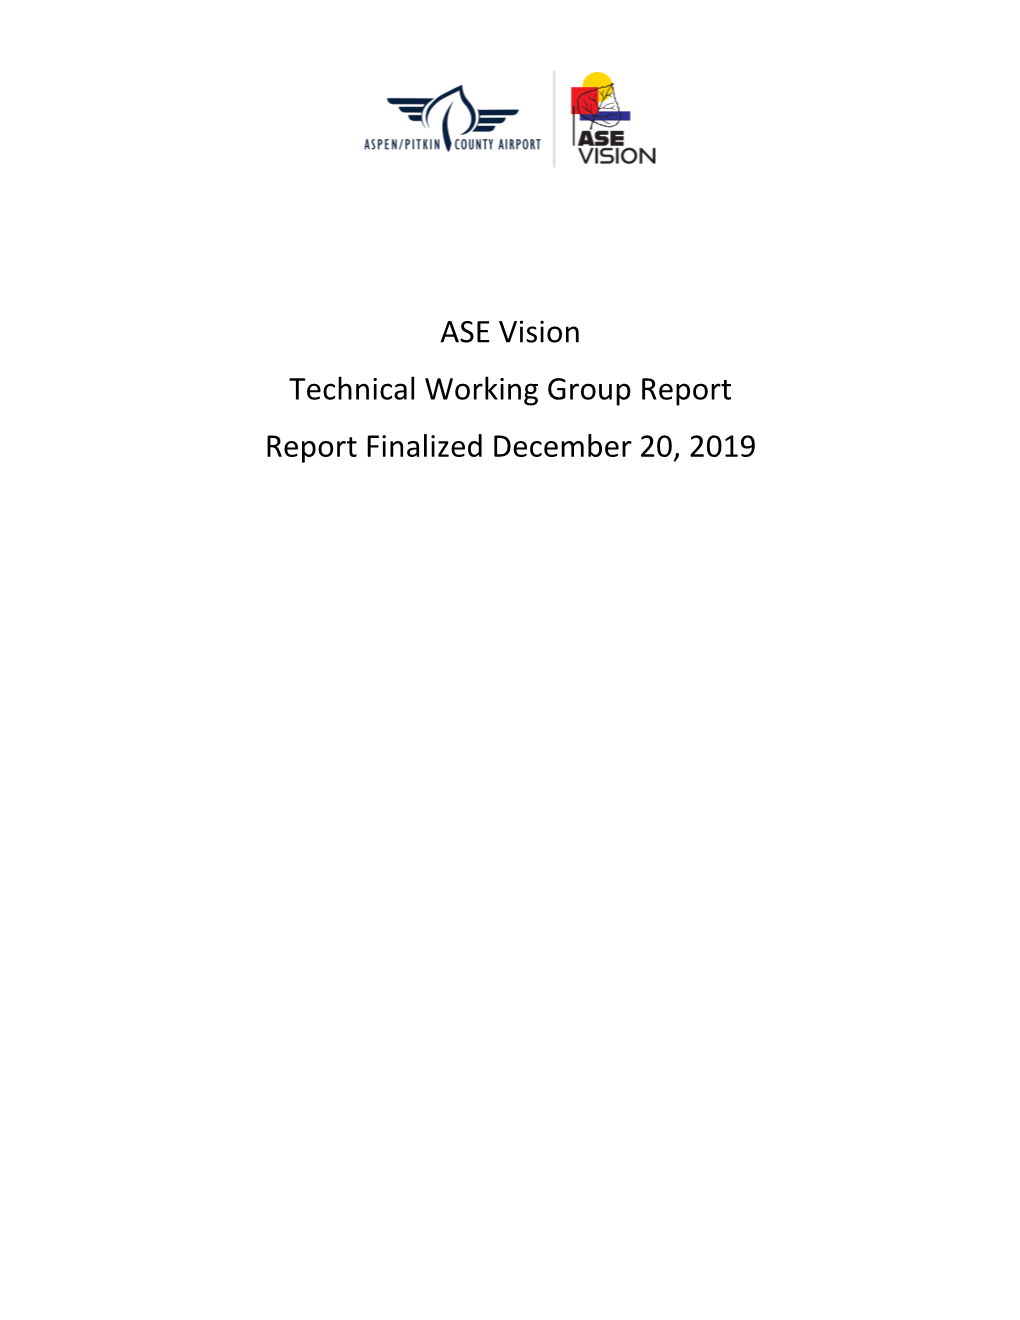 ASE Vision Technical Working Group Report Report Finalized December 20, 2019